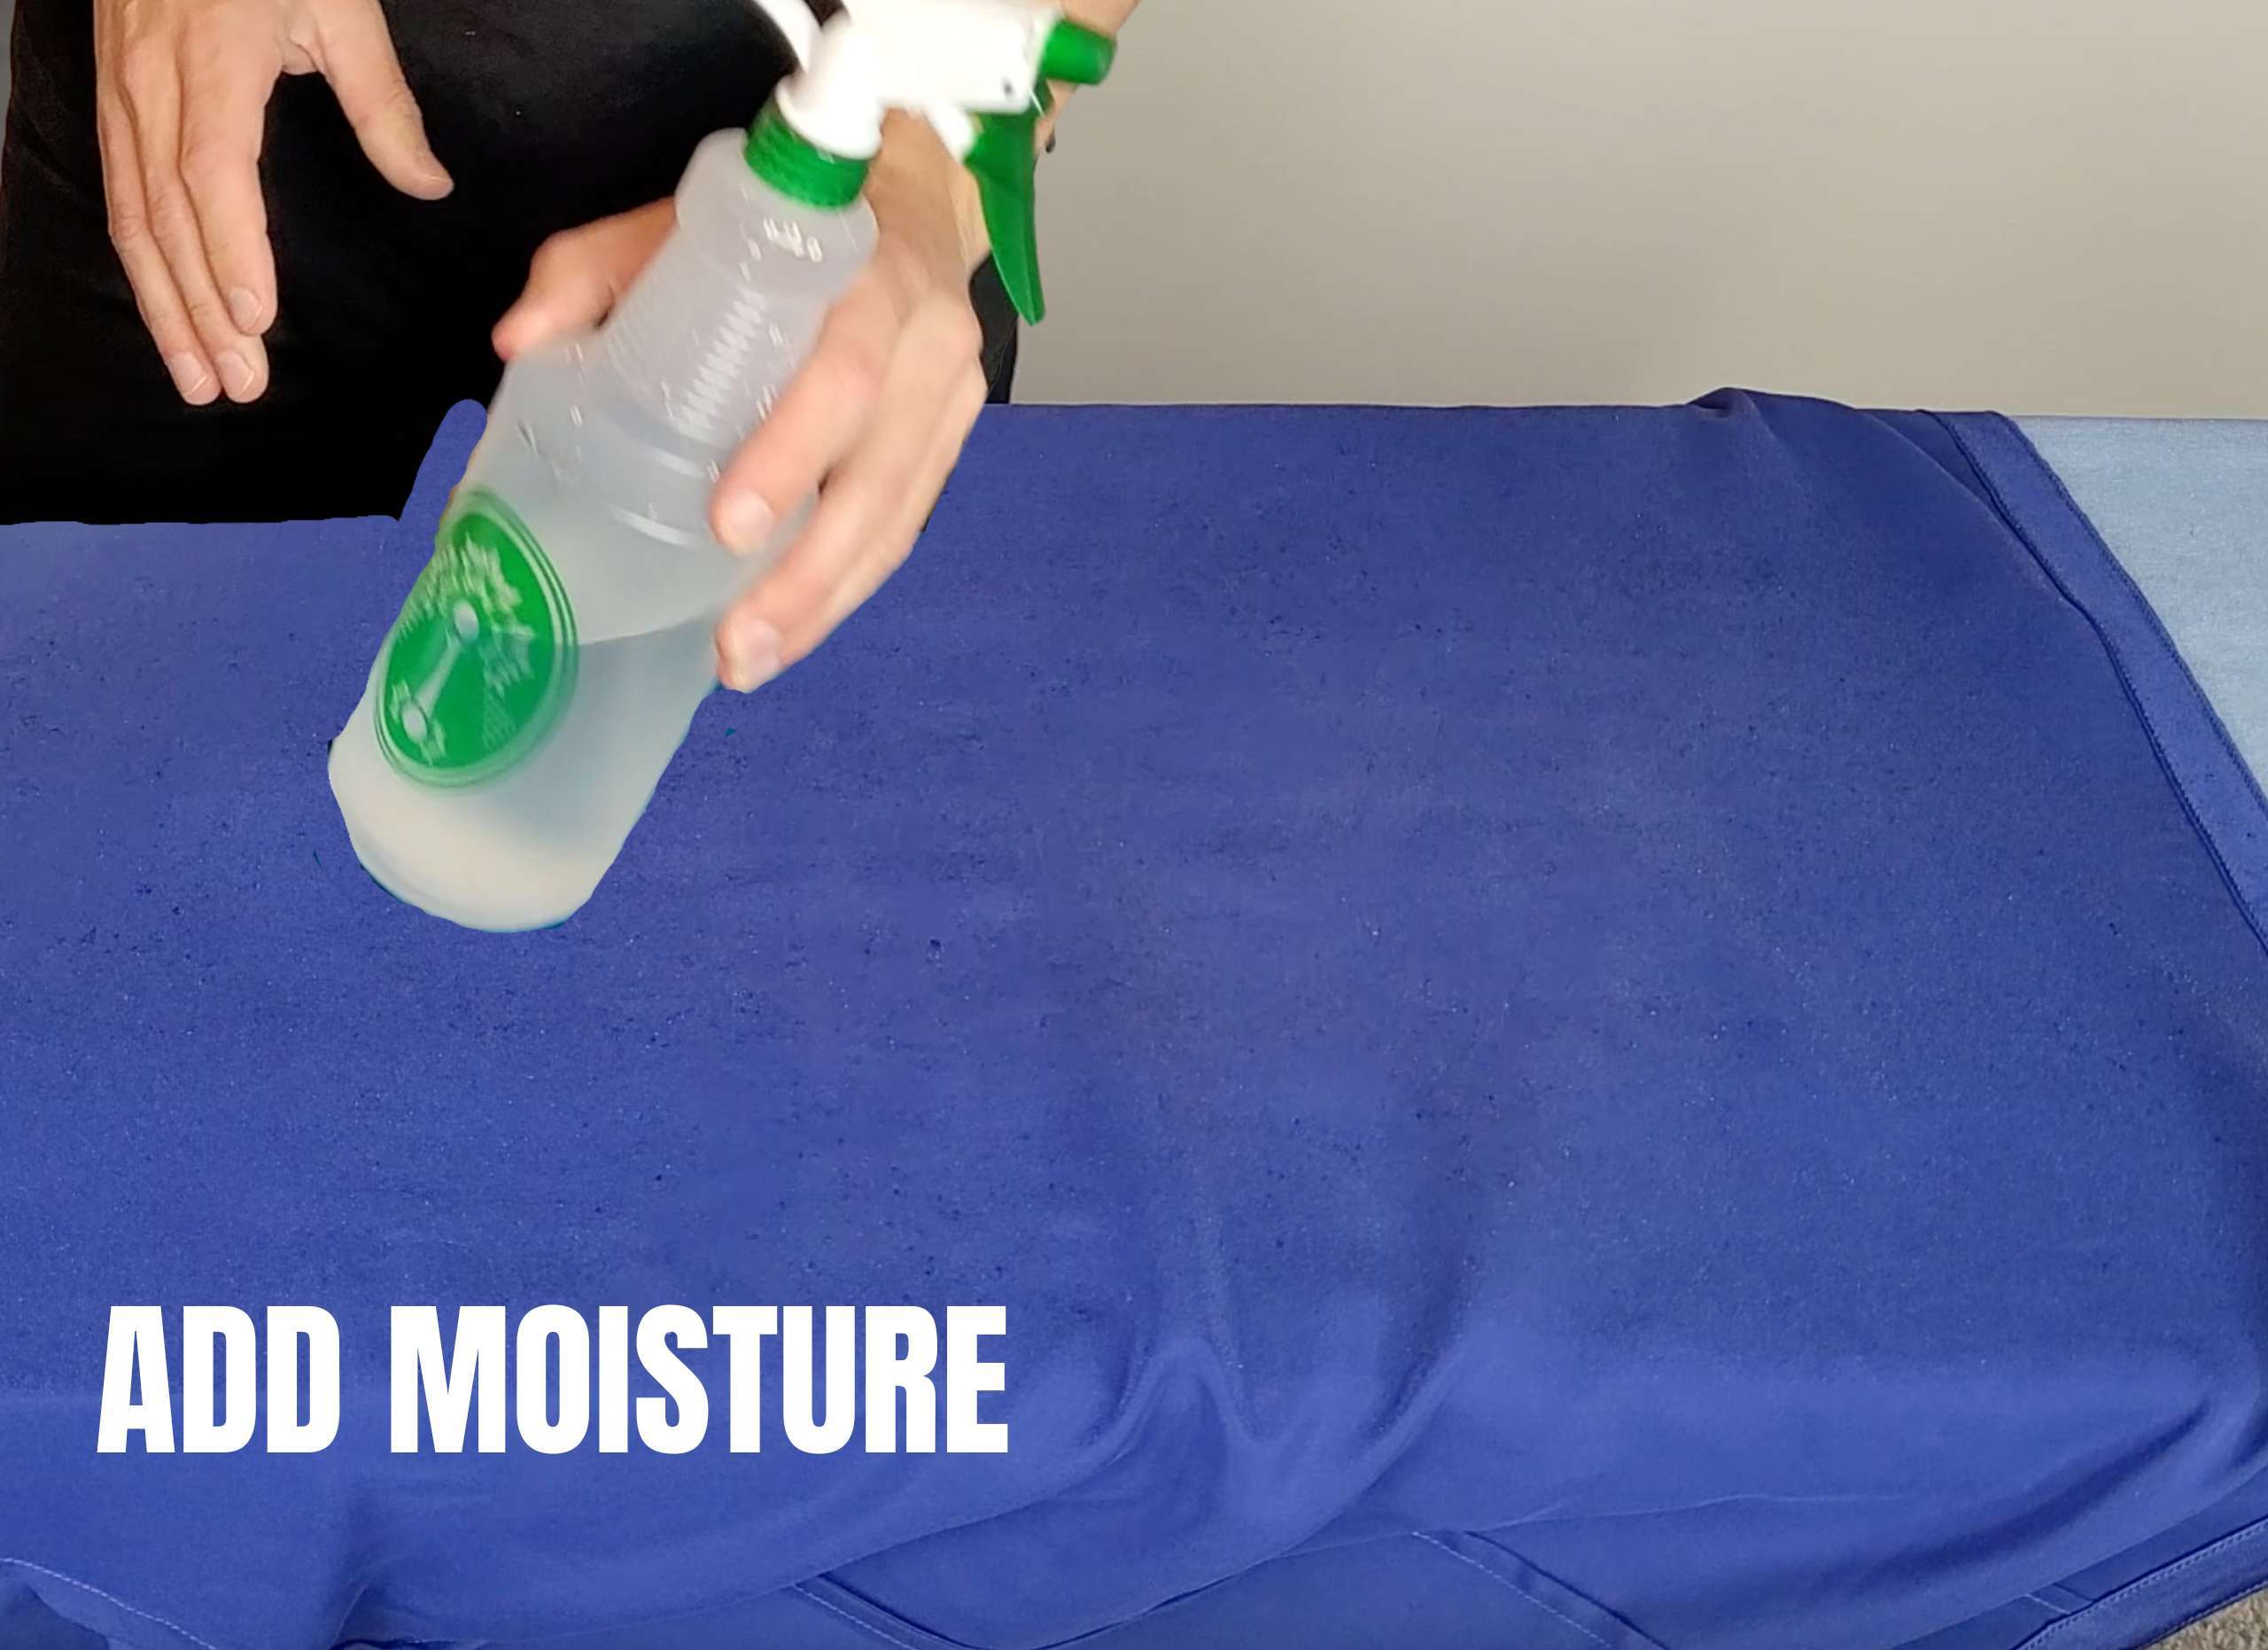 photo of a man using a spray bottle filled with water to add moisture to satin pajamas